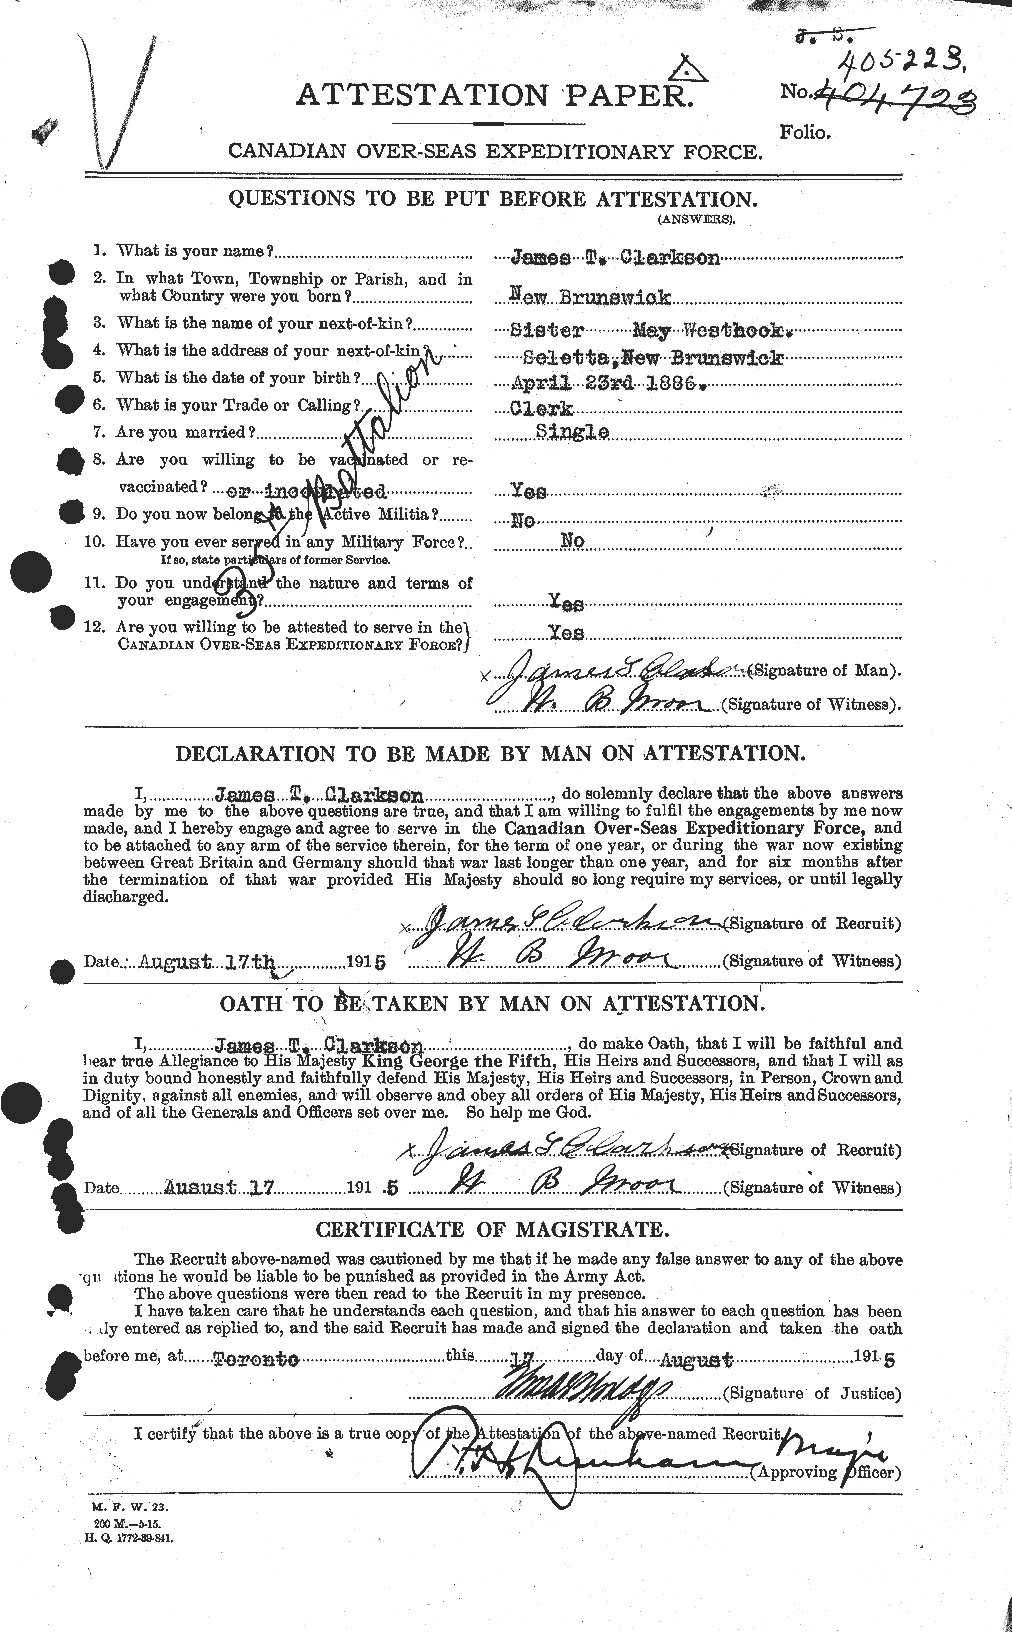 Personnel Records of the First World War - CEF 021450a